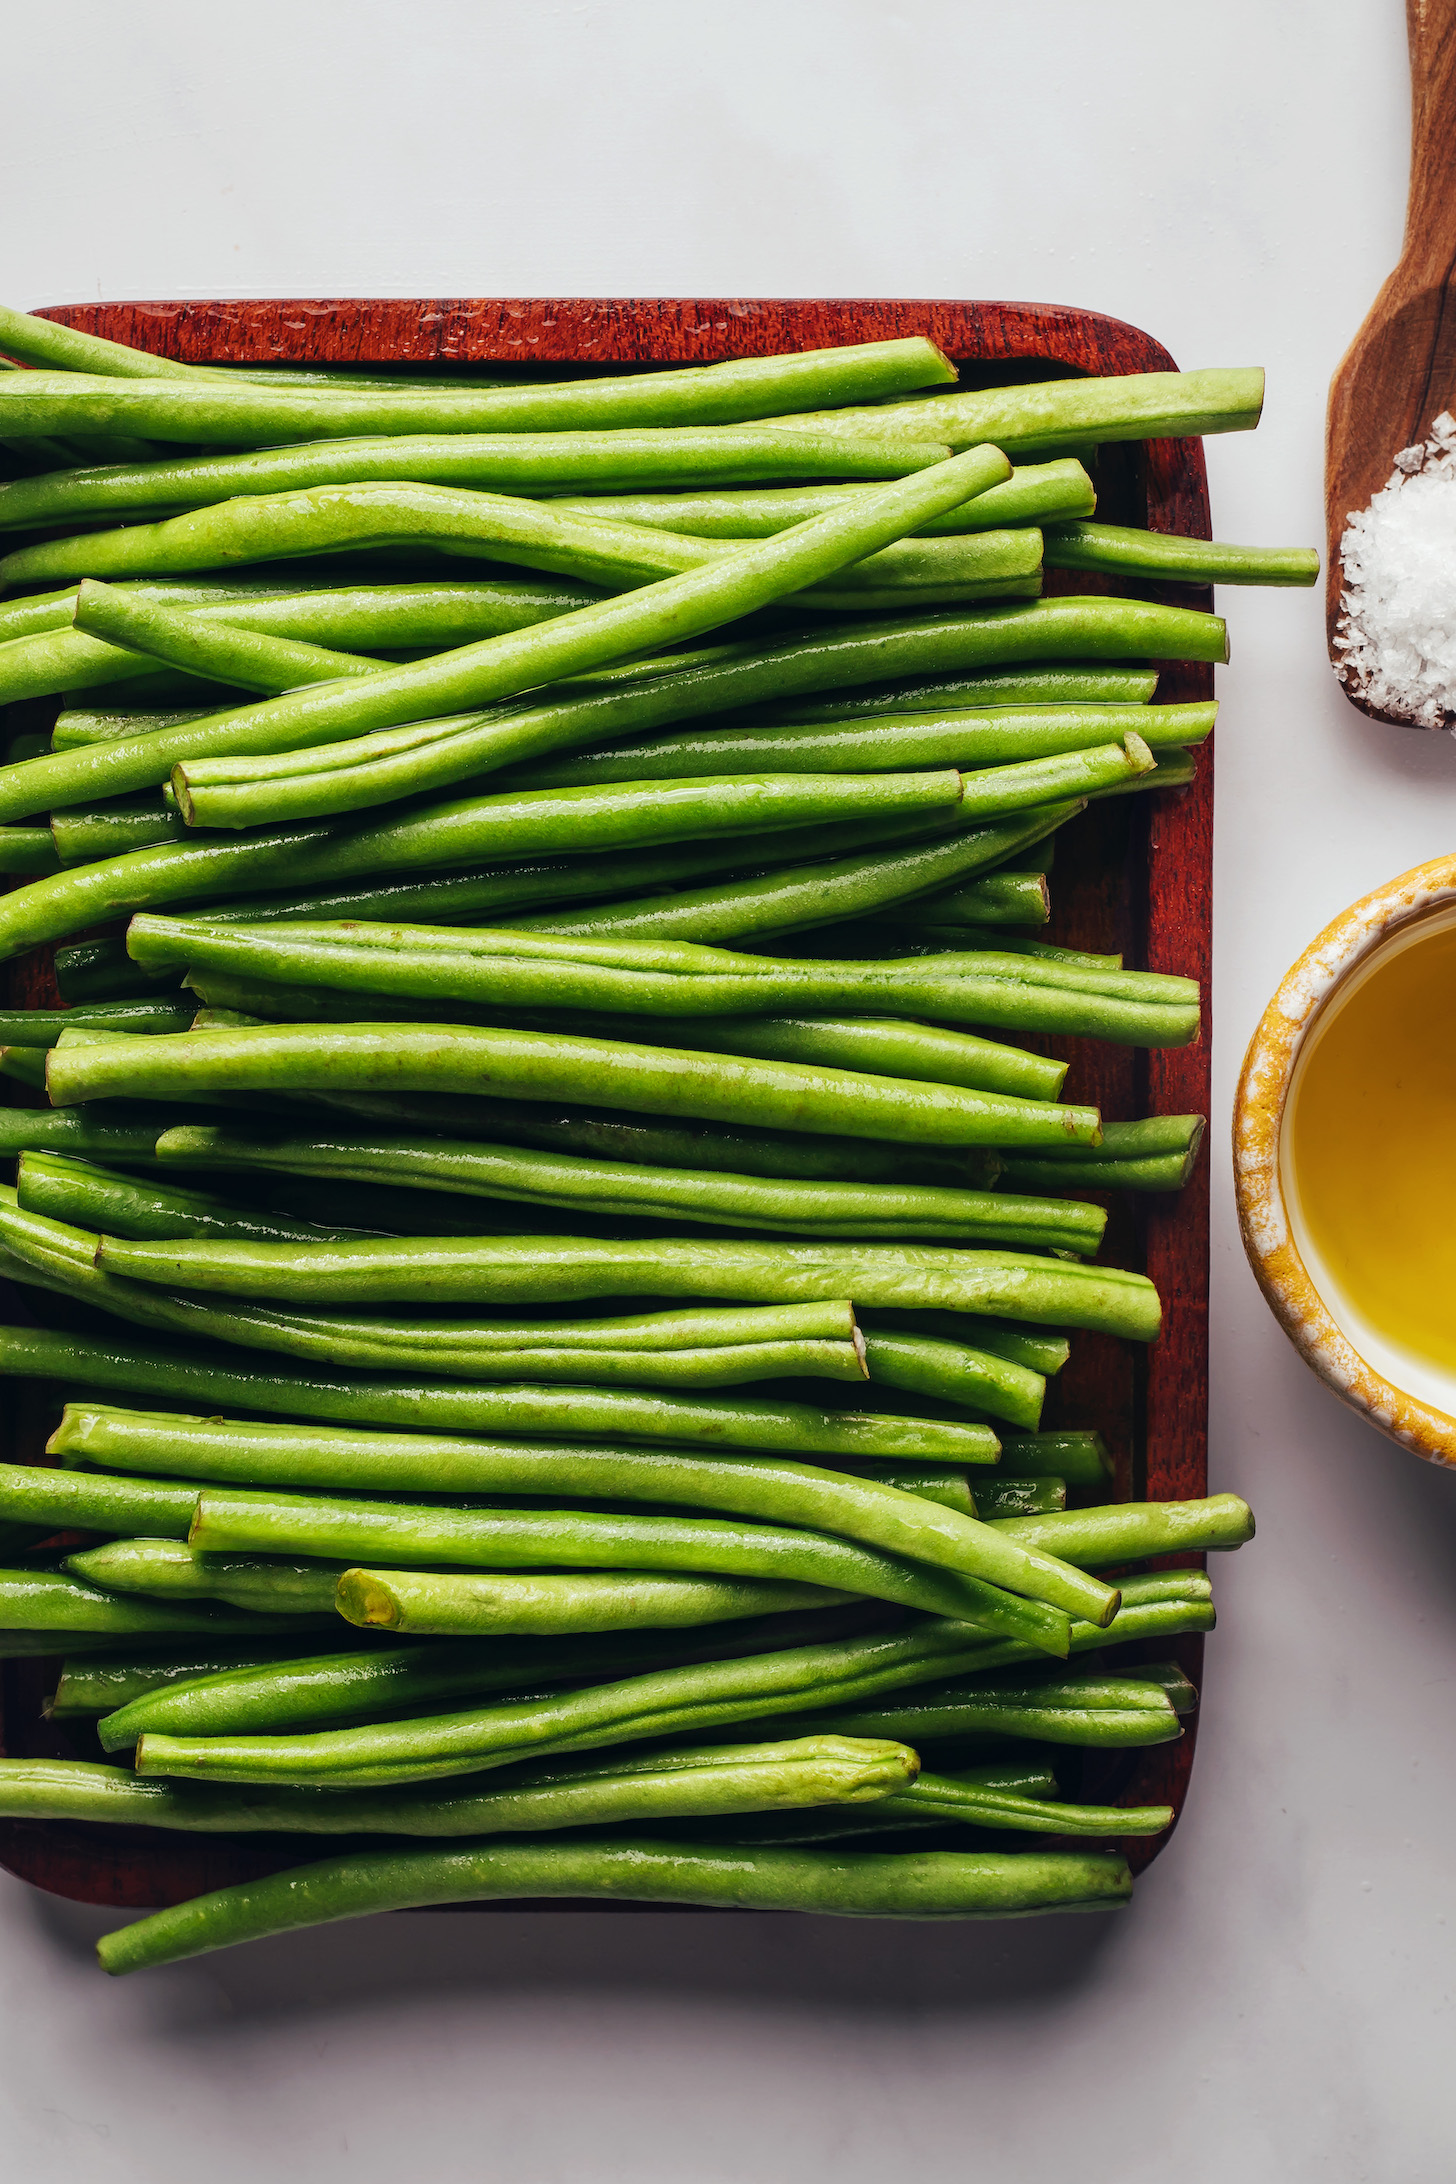 Green beans, salt, and olive oil